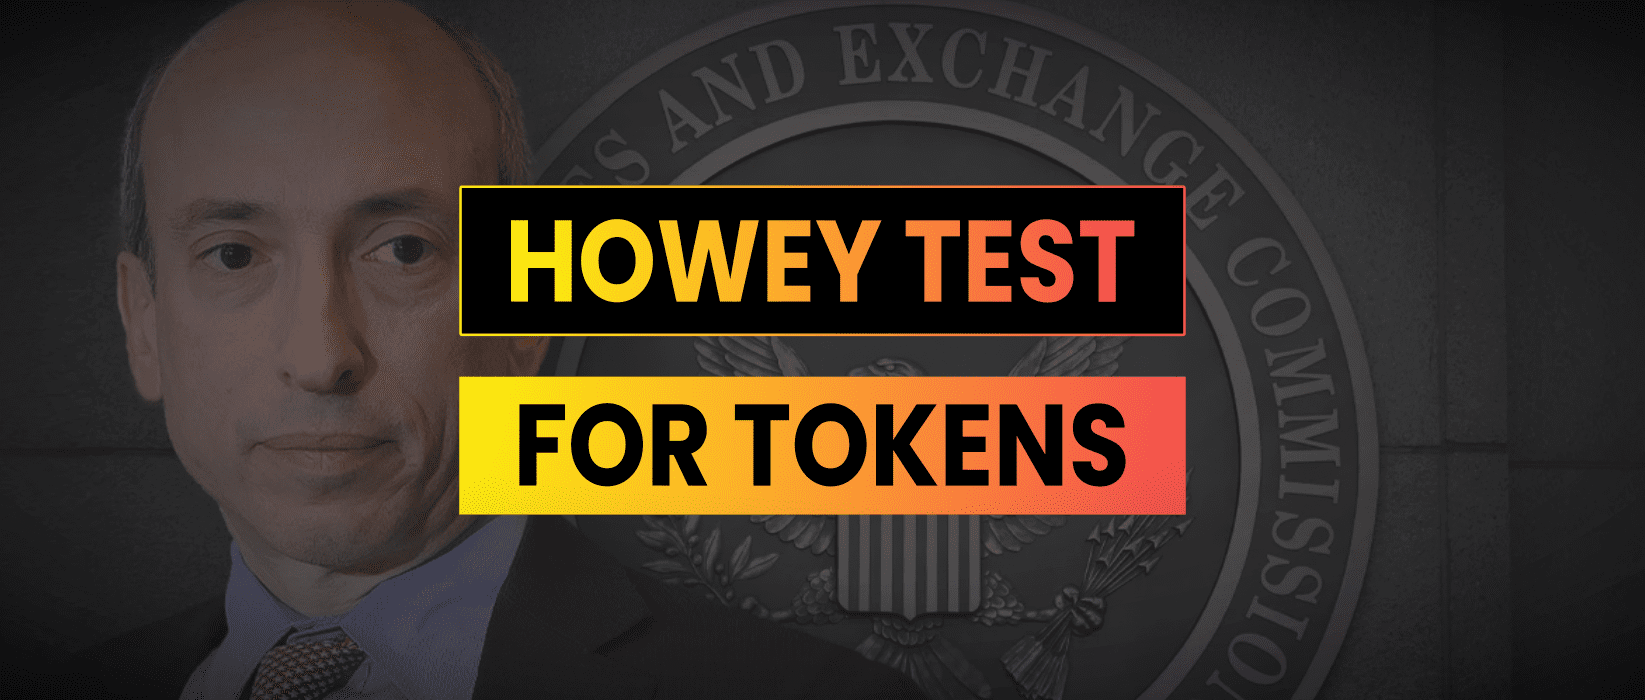 Is My Token A Security? The Howey Test For Digital Assets